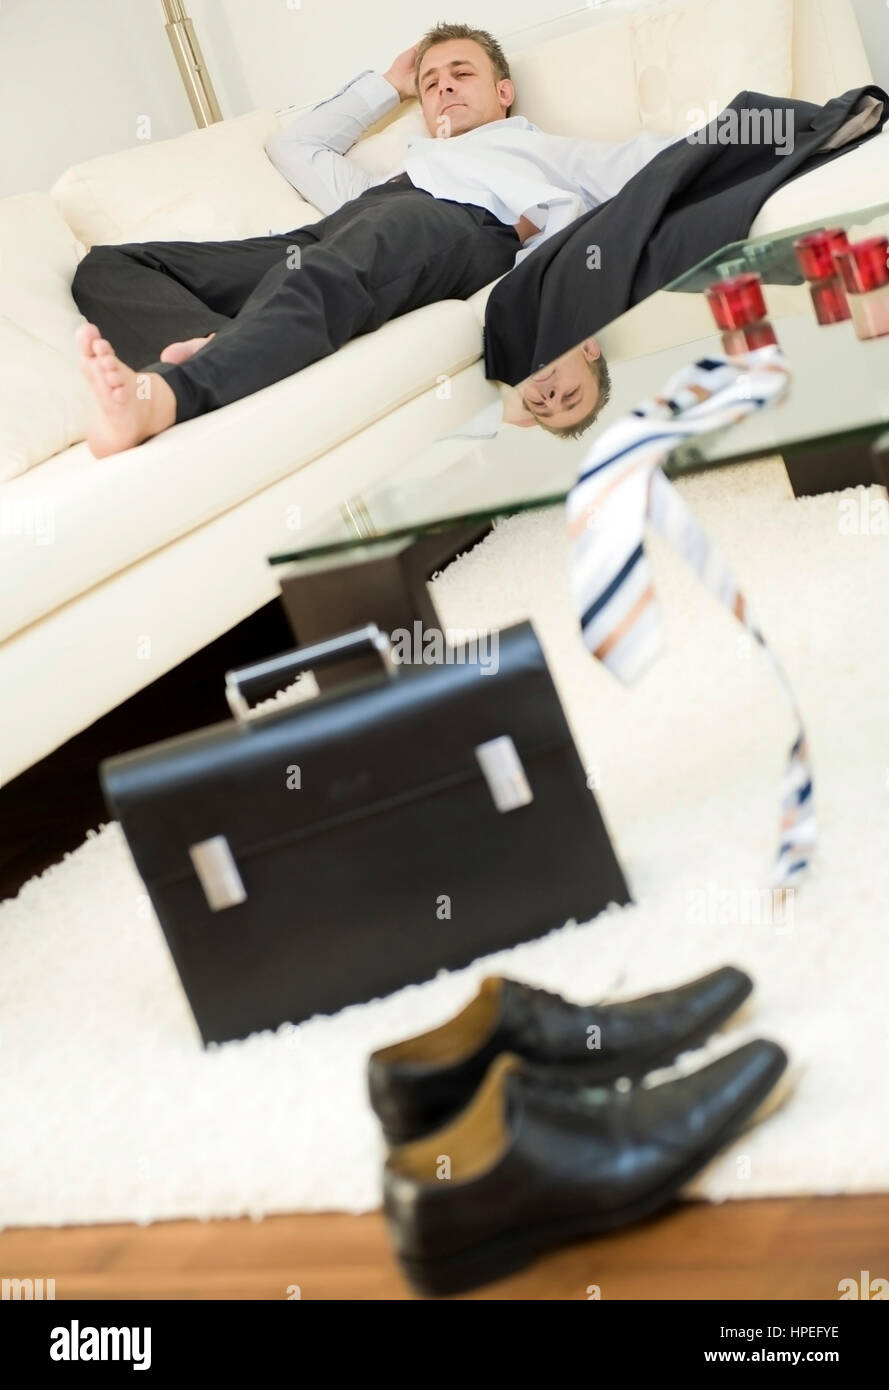 Model released , Feierabend, Geschaeftsmann liegt erschoepft Zuhause auf der Couch - end of the work day, exhausted businessman after work at home Stock Photo